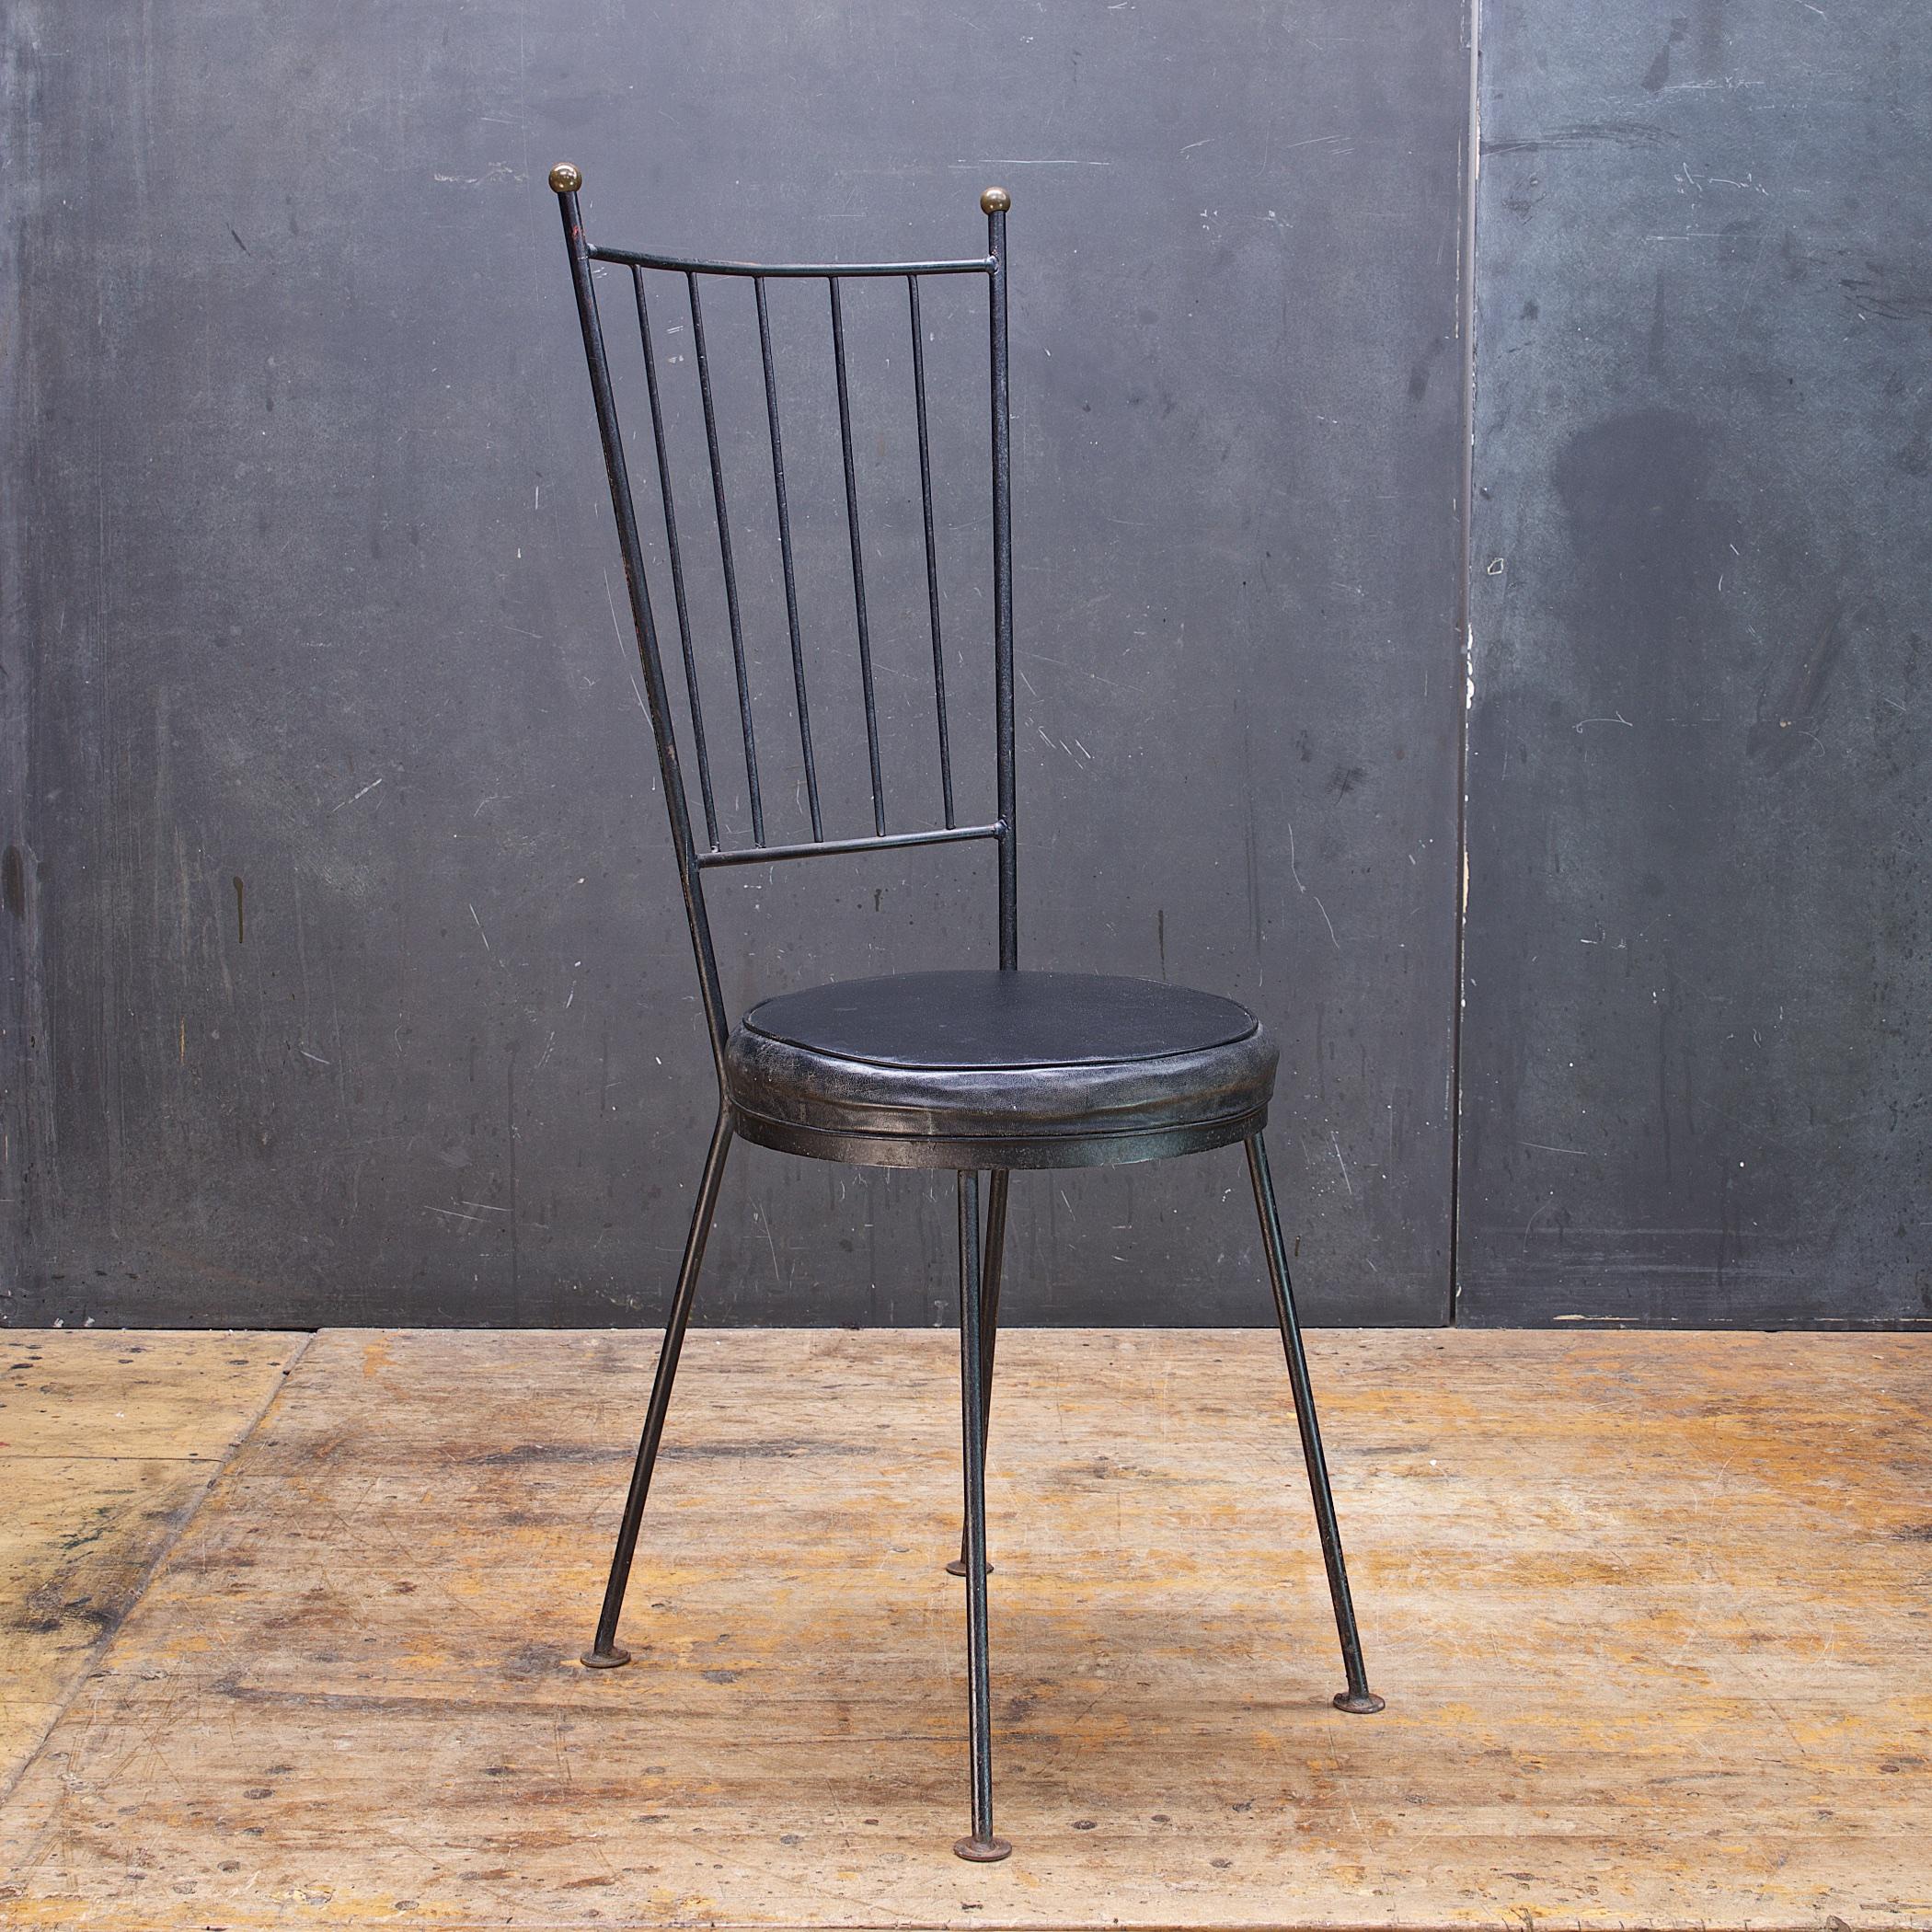 Very fun, low cost 50s minimally constructed tall enameled steel rod dining chair. This example has aged nicely, tarnished brass finials, and even the black naugahyde has taken on a grayish patina.